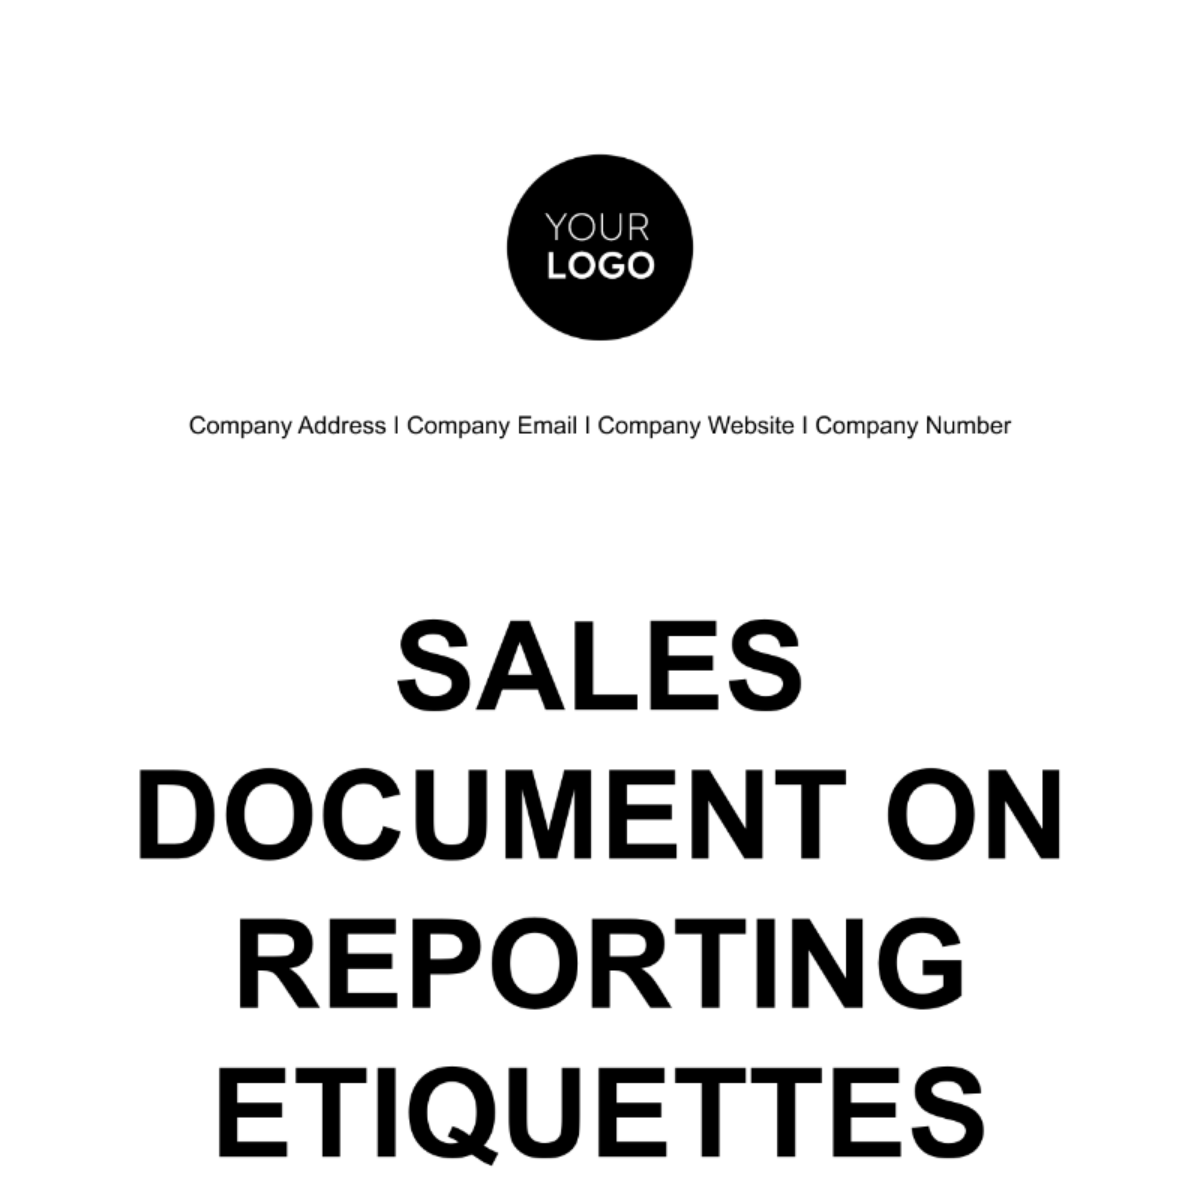 Free Sales Document on Reporting Etiquettes Template